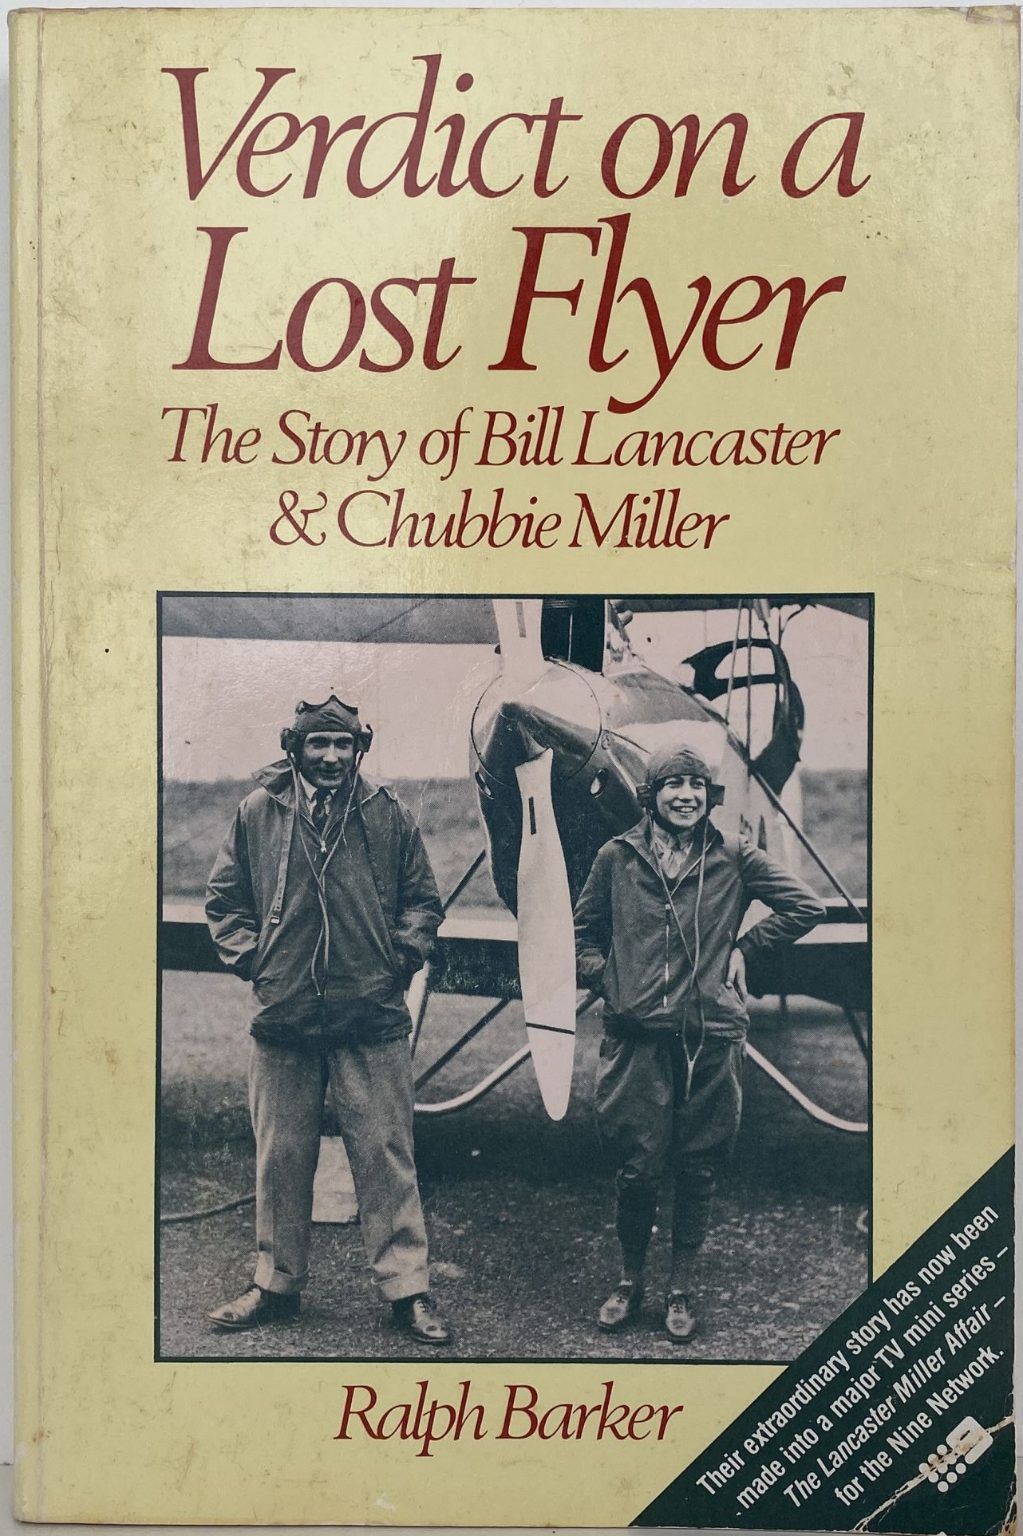 VERDICT ON A LOST FLYER: The Story of Bill Lancaster & Chubbie Miller